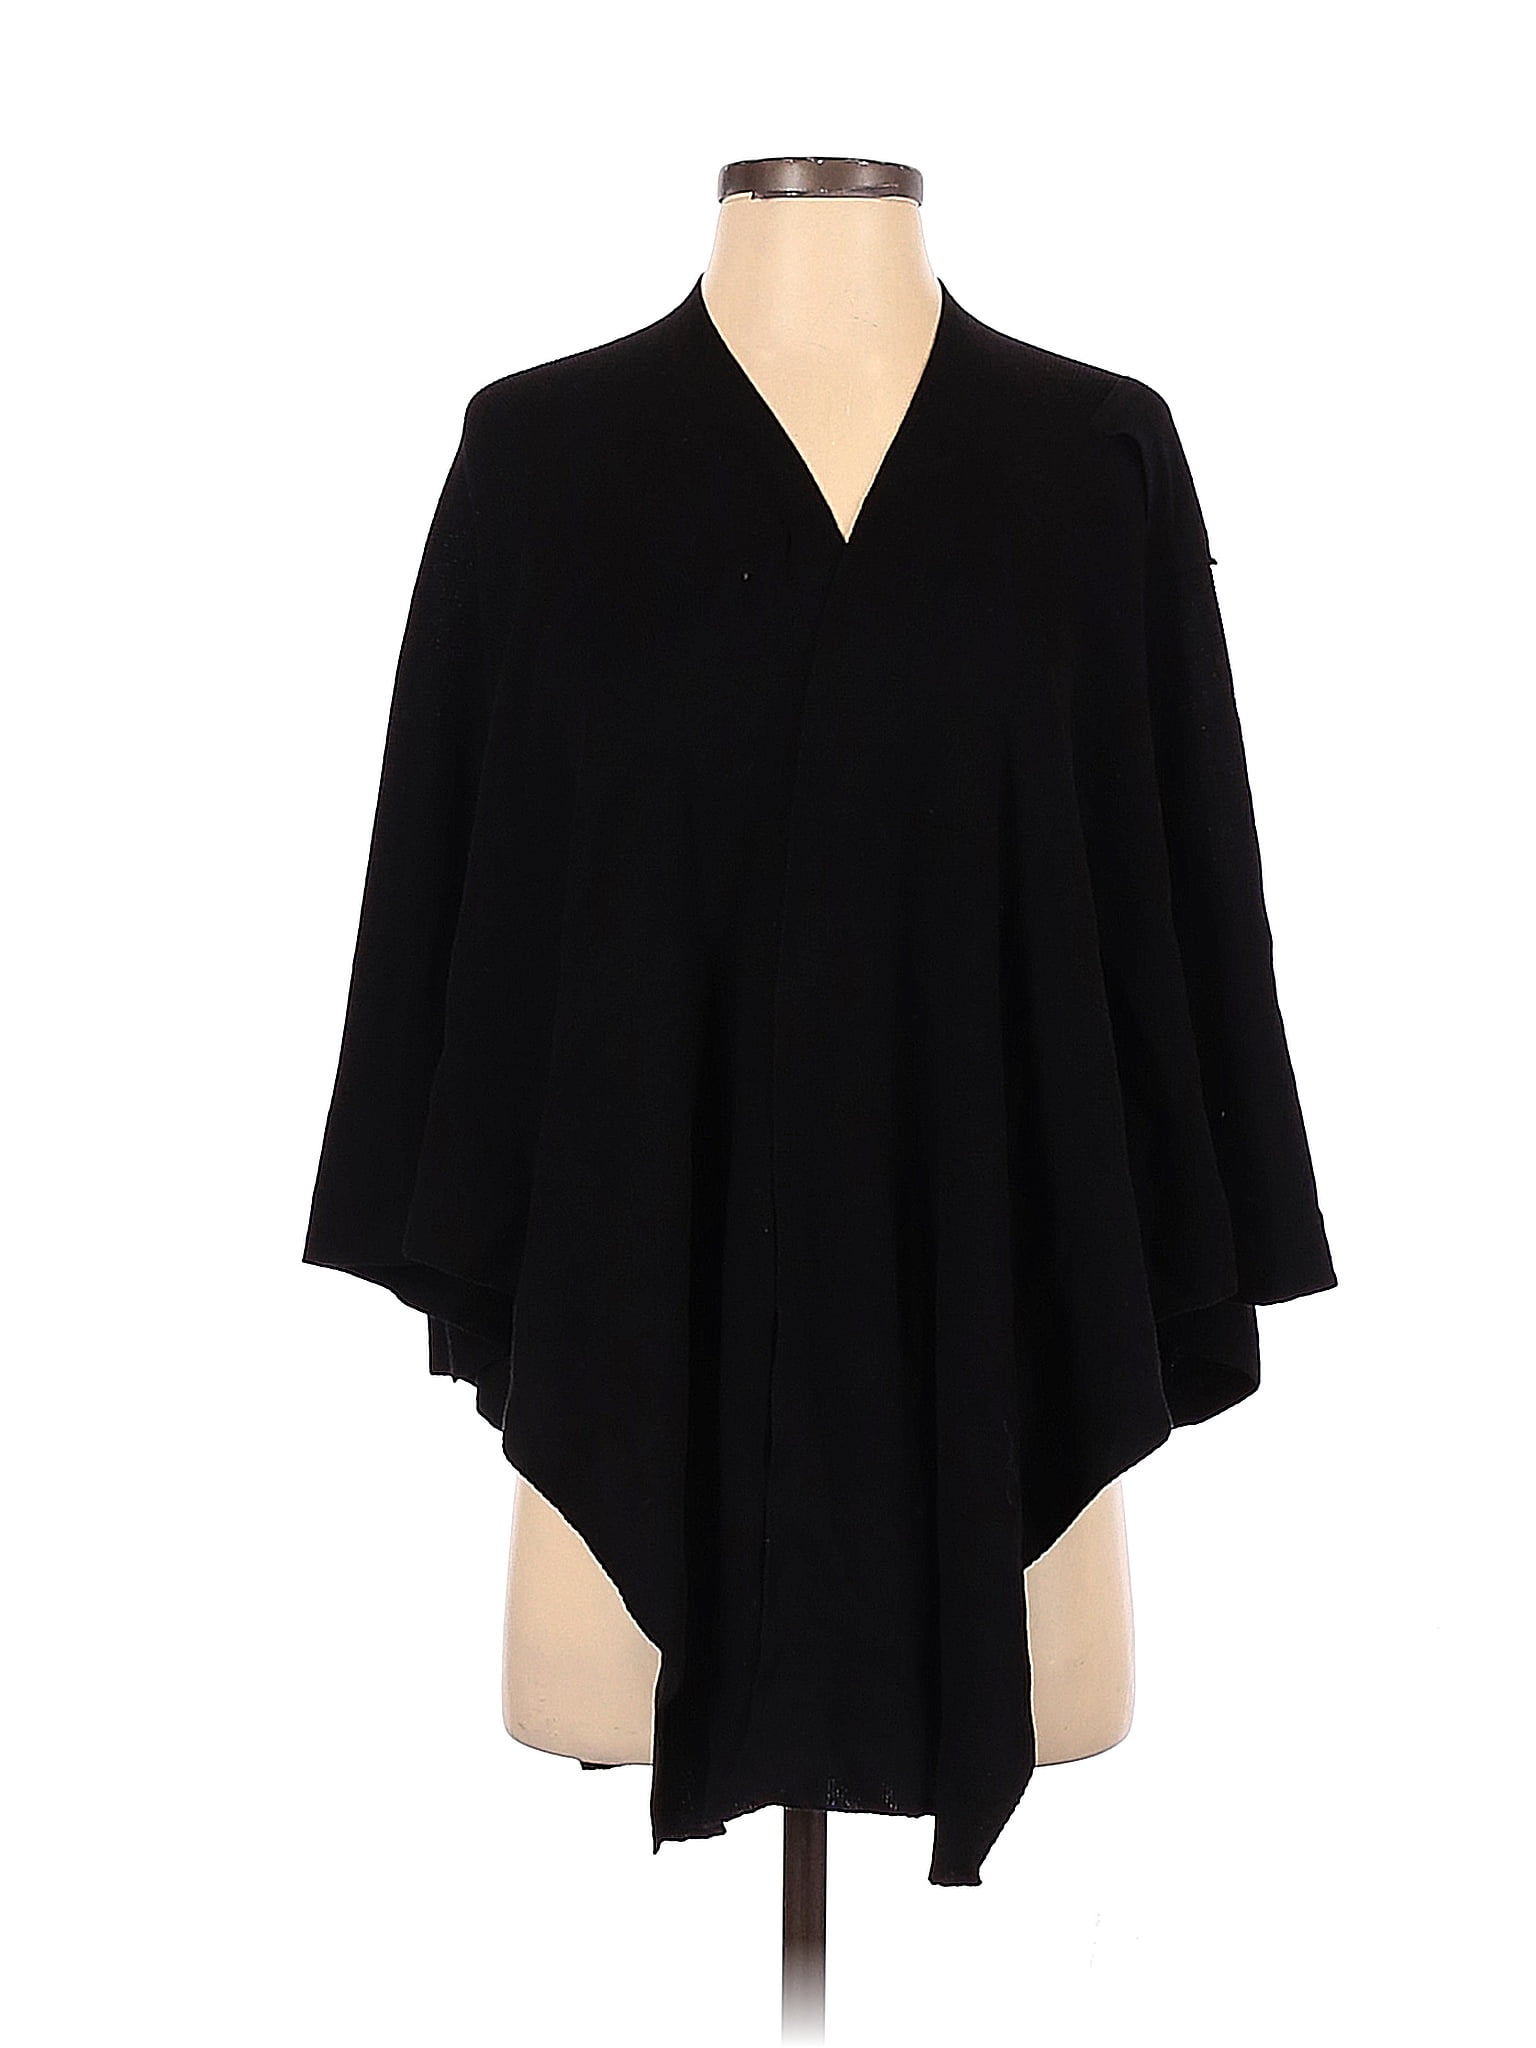 Pre-Owned Soft Surroundings Women's One Size Fits All Wrap - Walmart.com